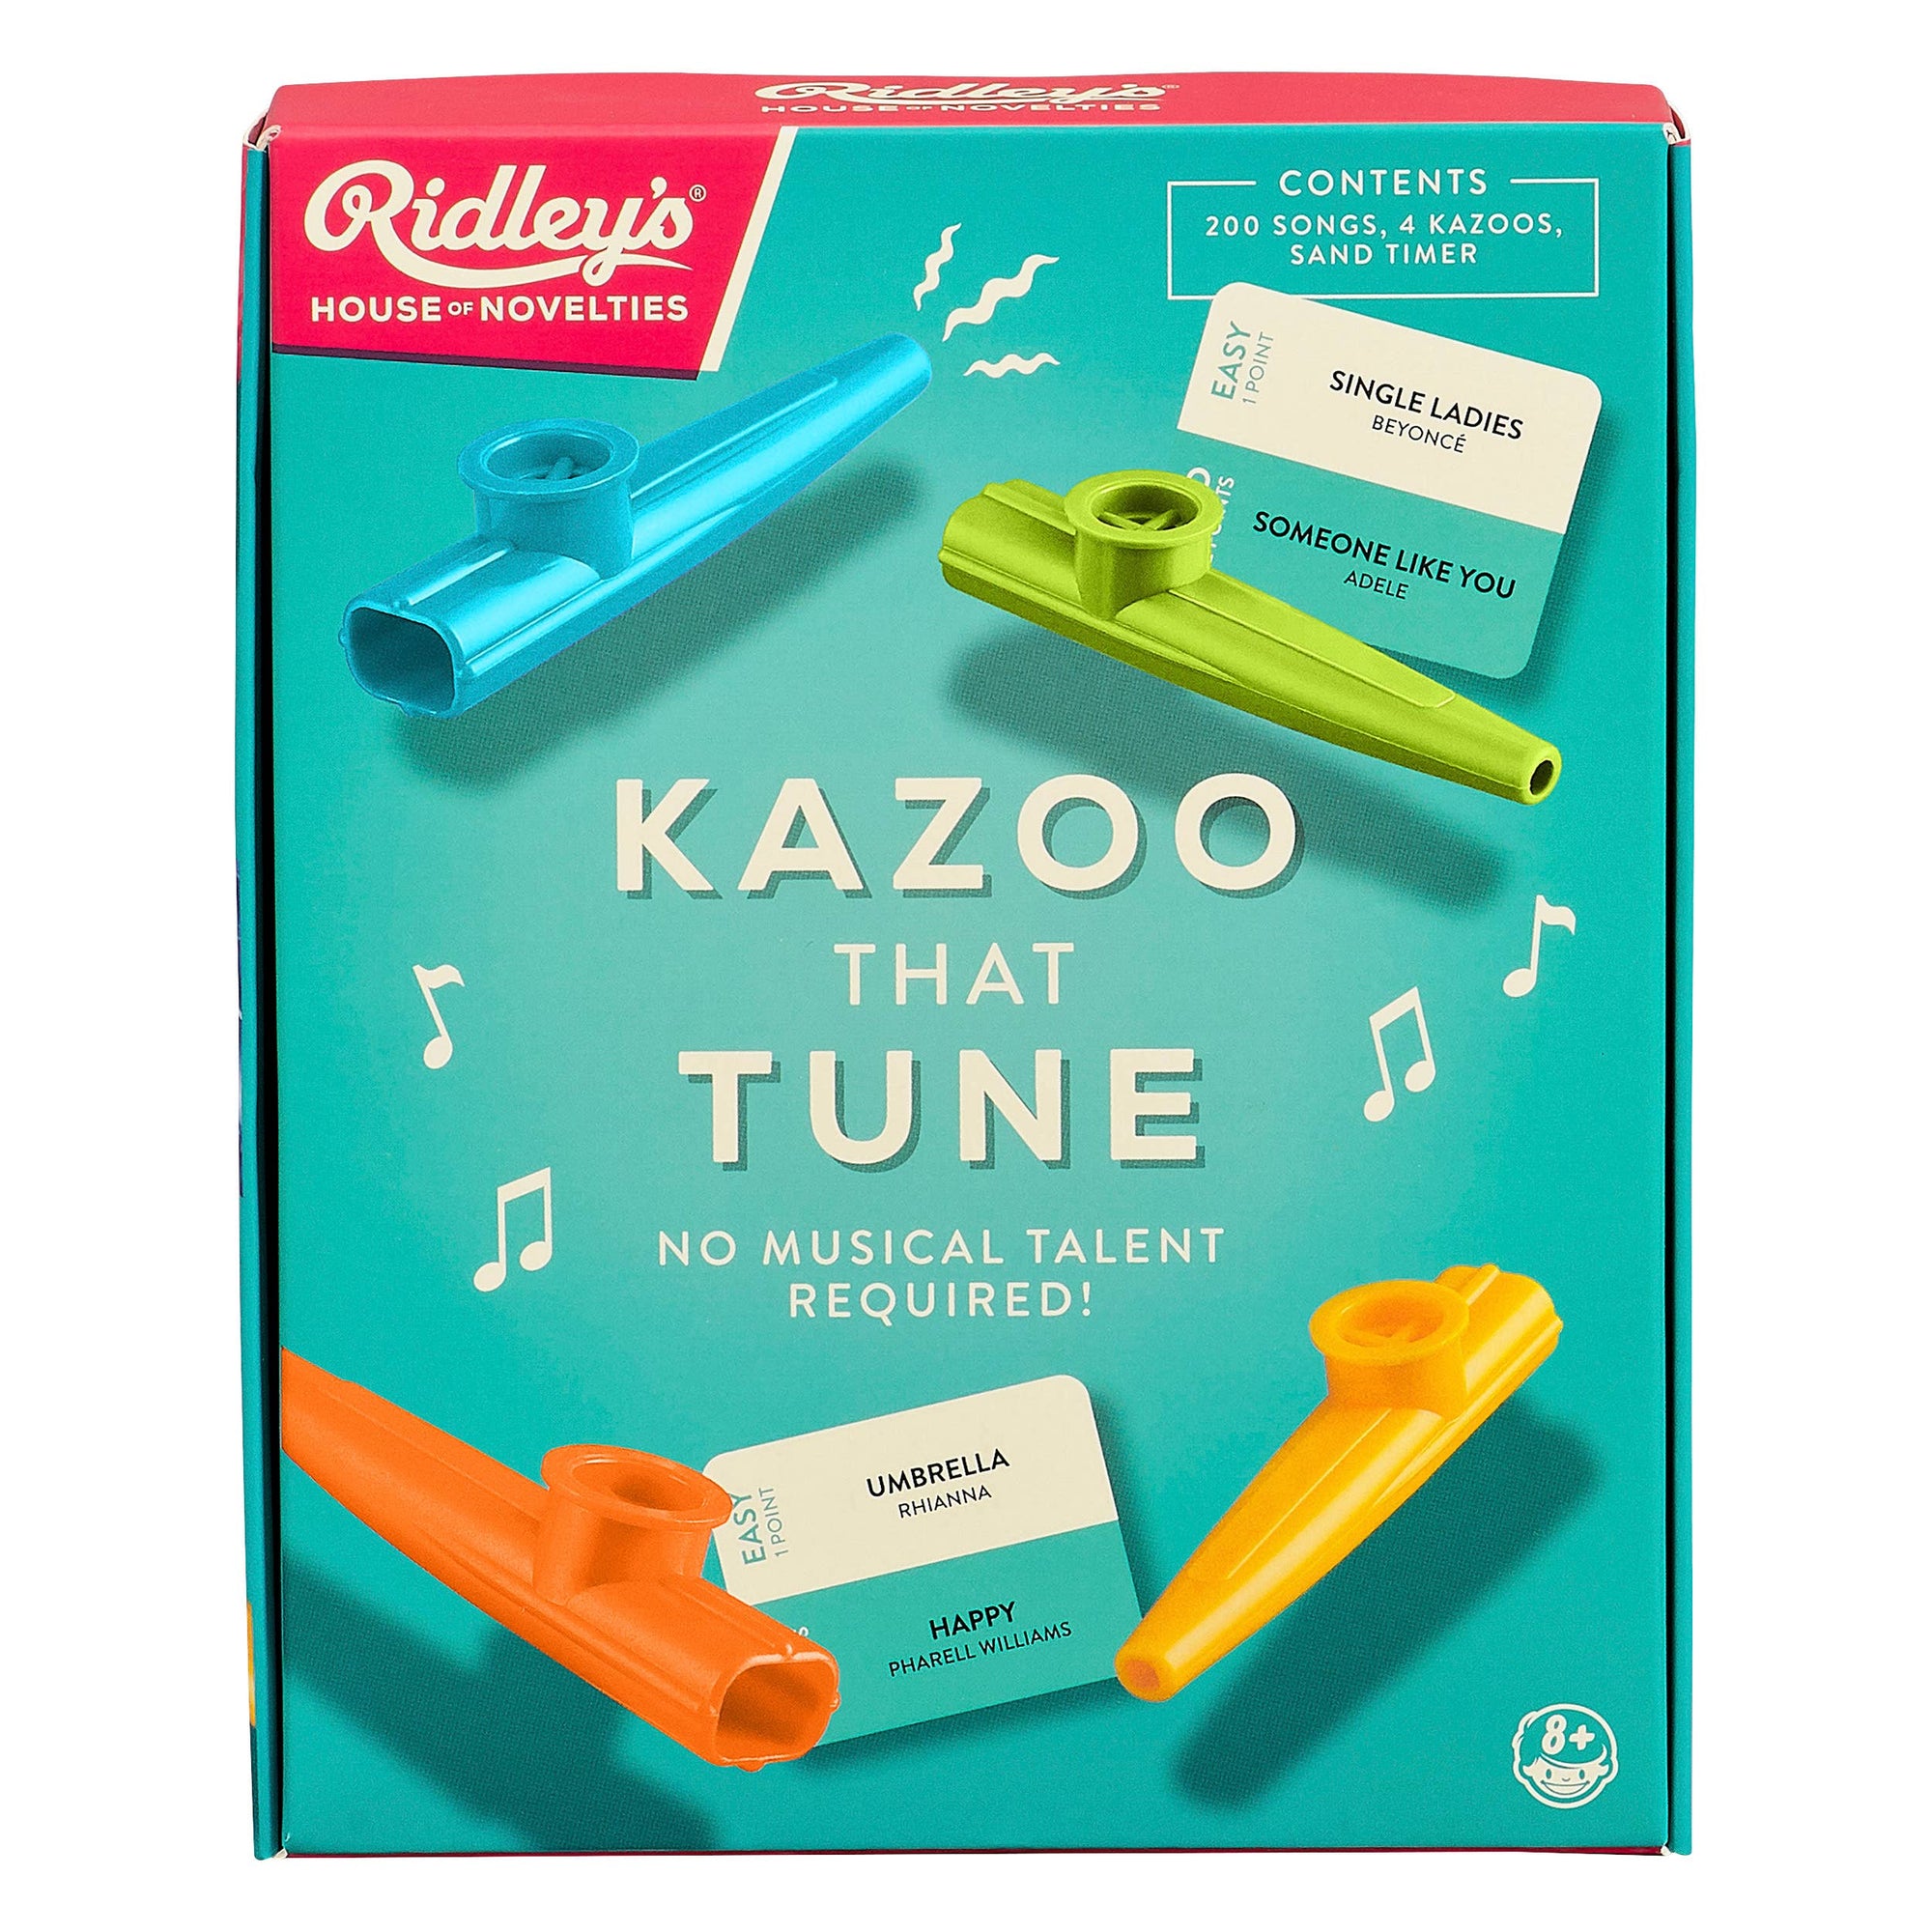 A box of Ridley's Games musical instruments, featuring the Kazoo That Tune and Kazoo.